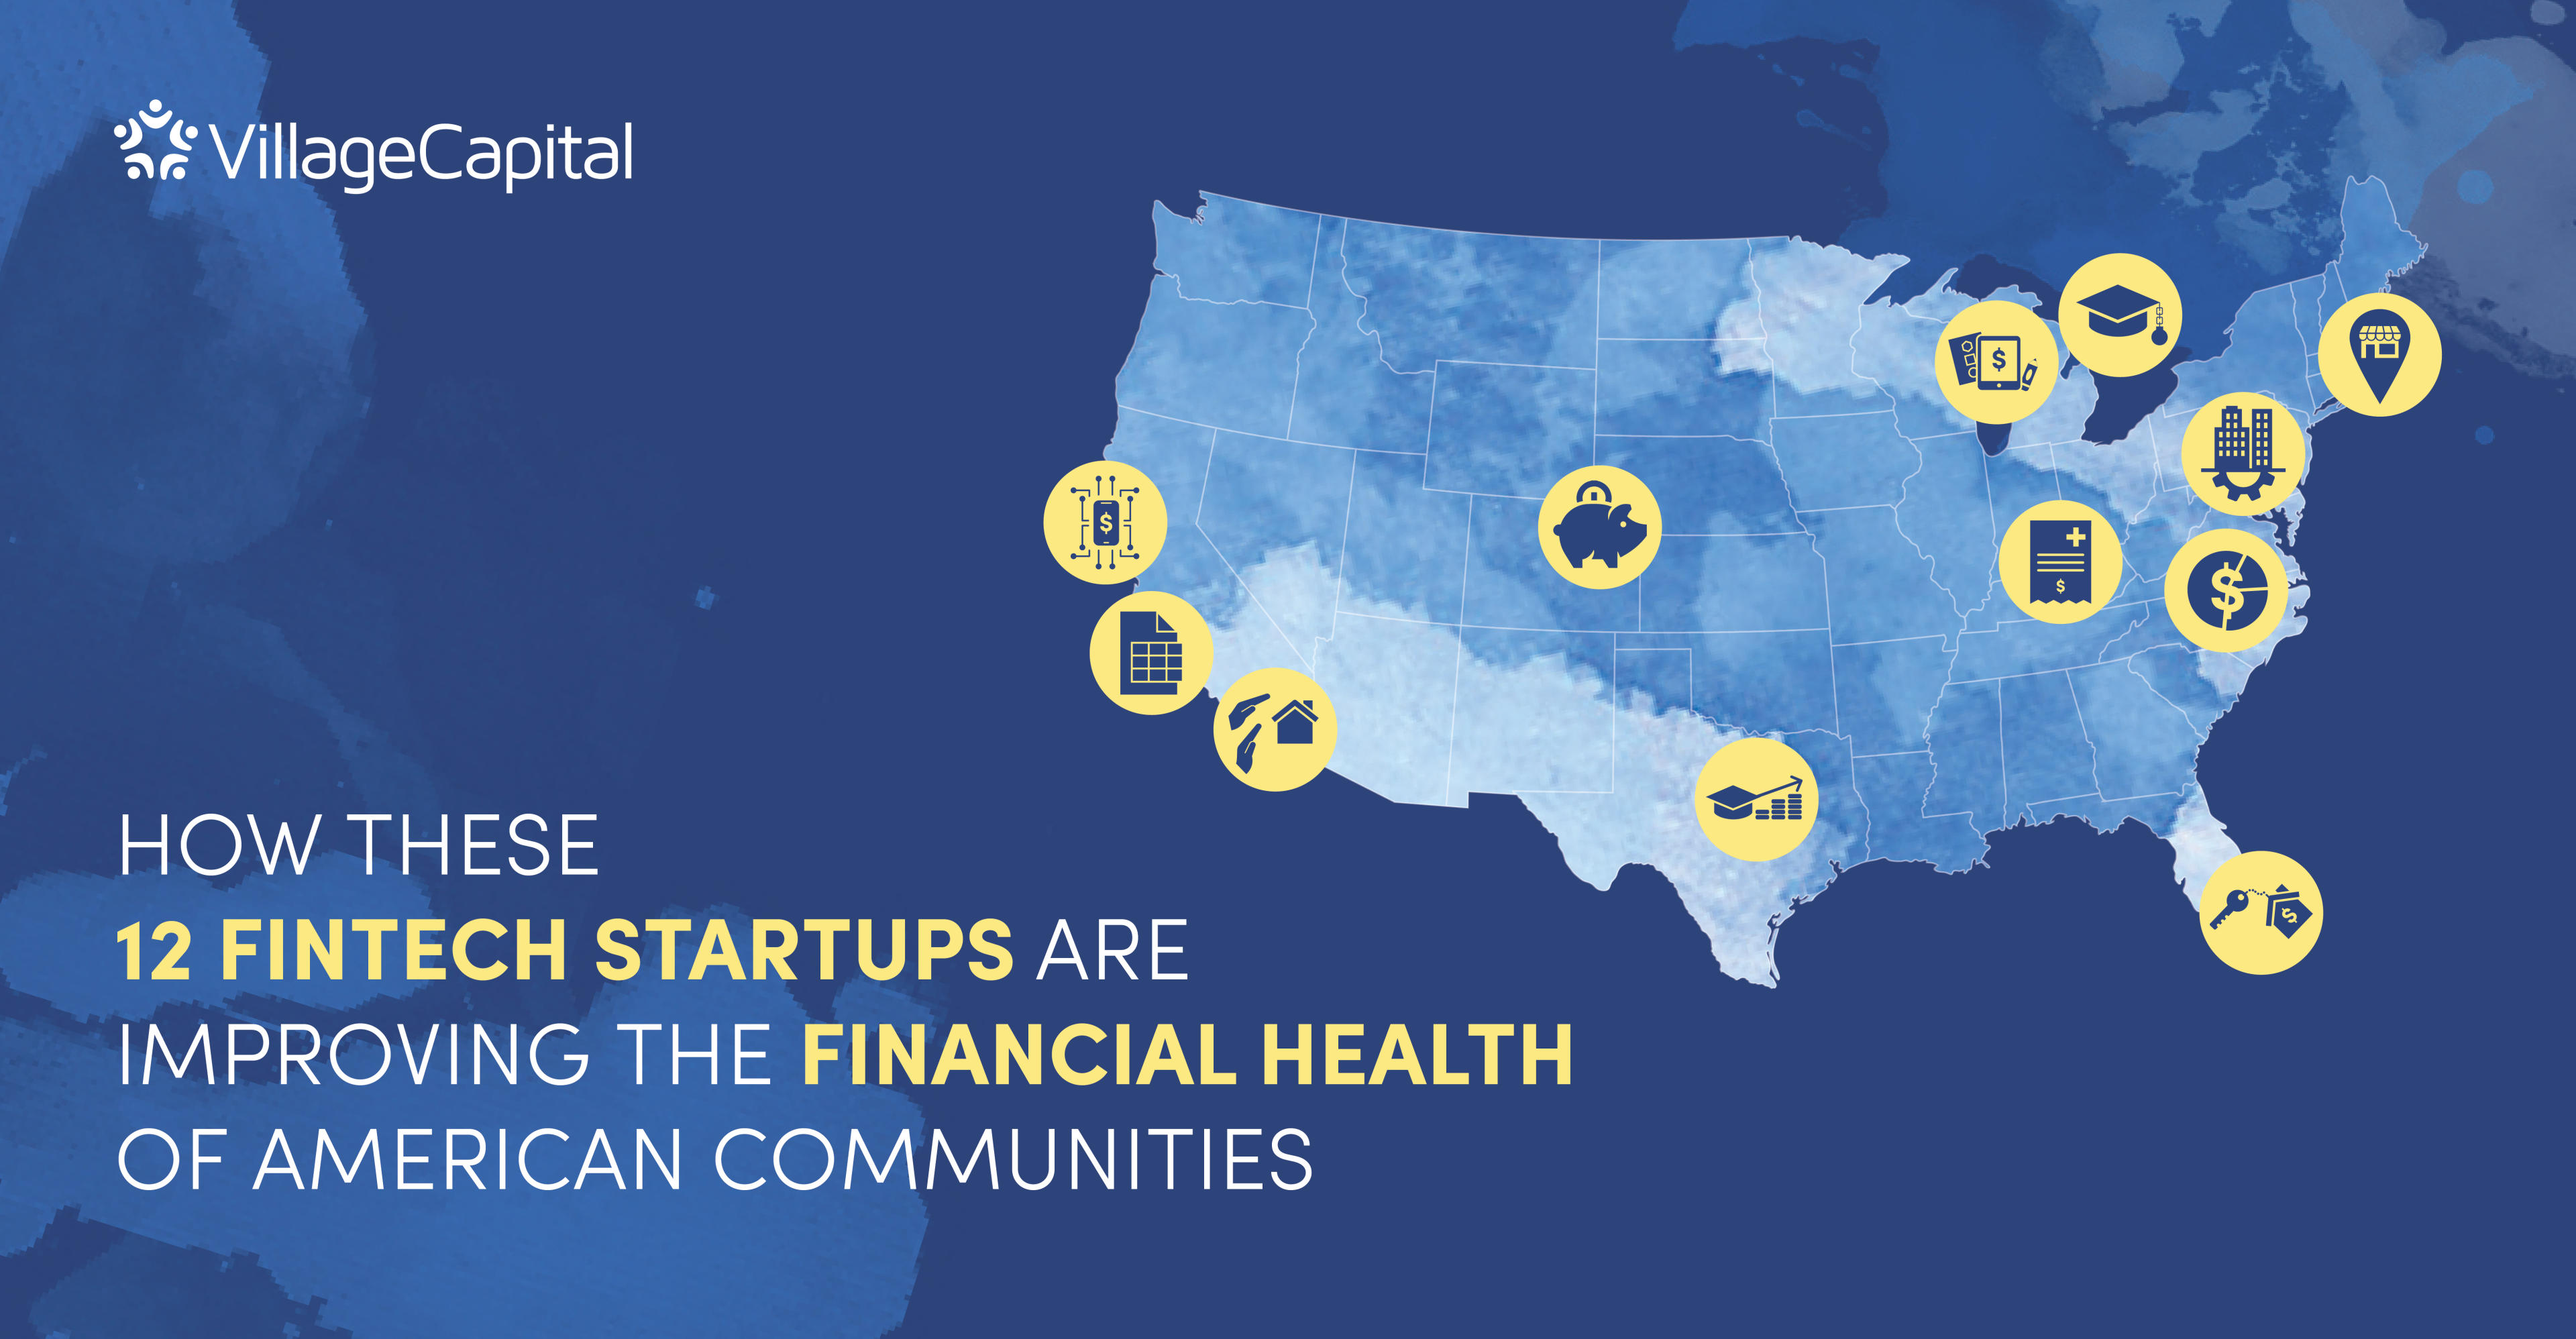 How These 12 Fintech Startups Are Improving the Financial Health of American Communities